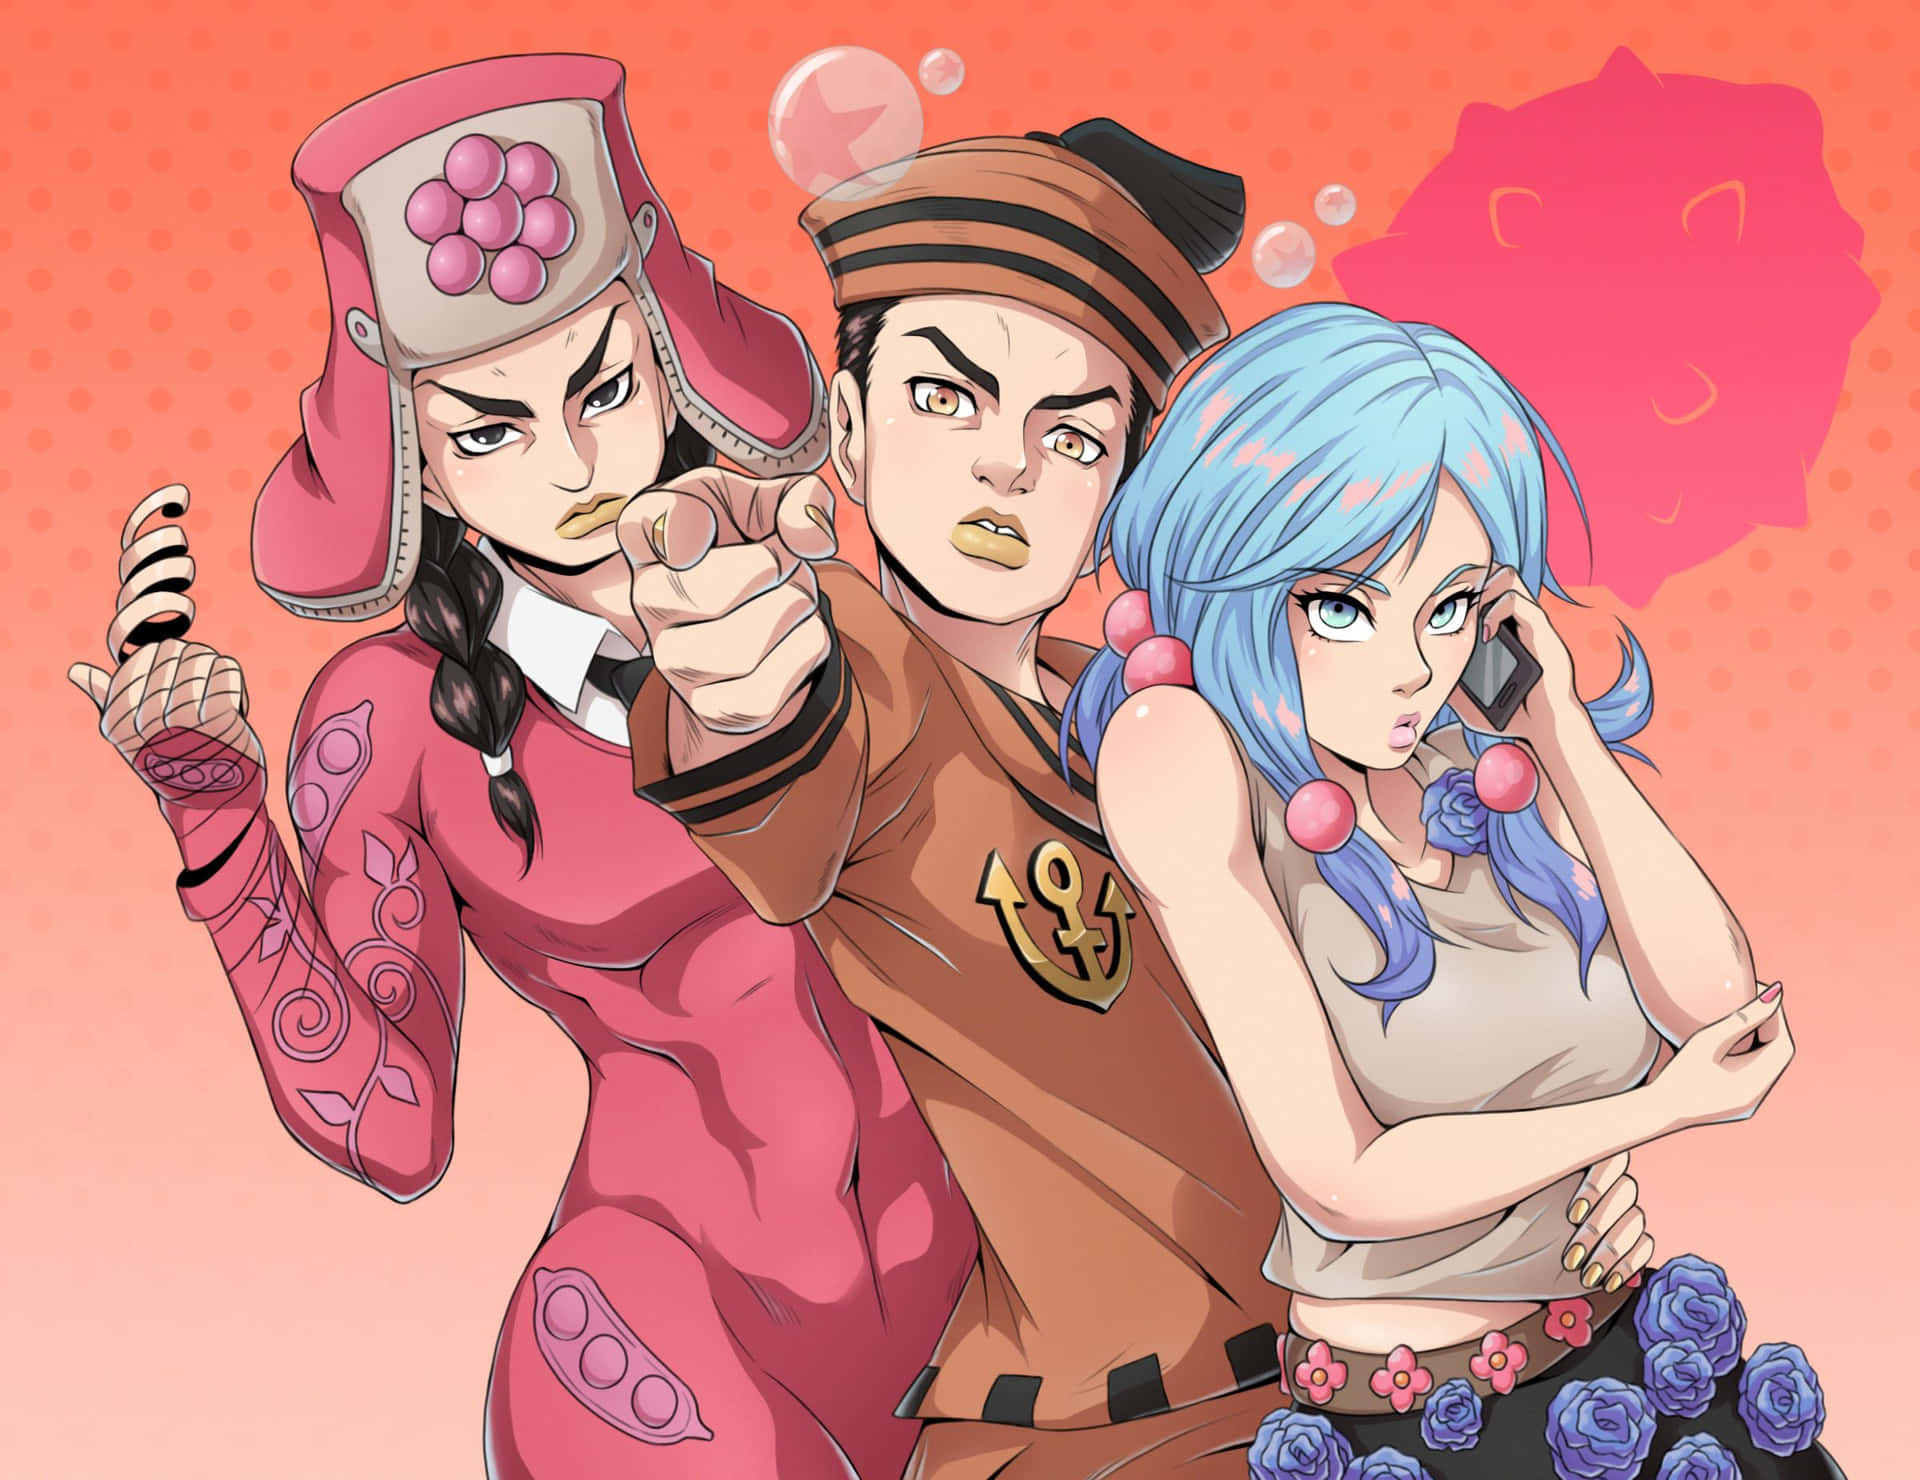 Gappy and Yasuho of JoJolion in stylish outfits amidst a purple and blue background Wallpaper